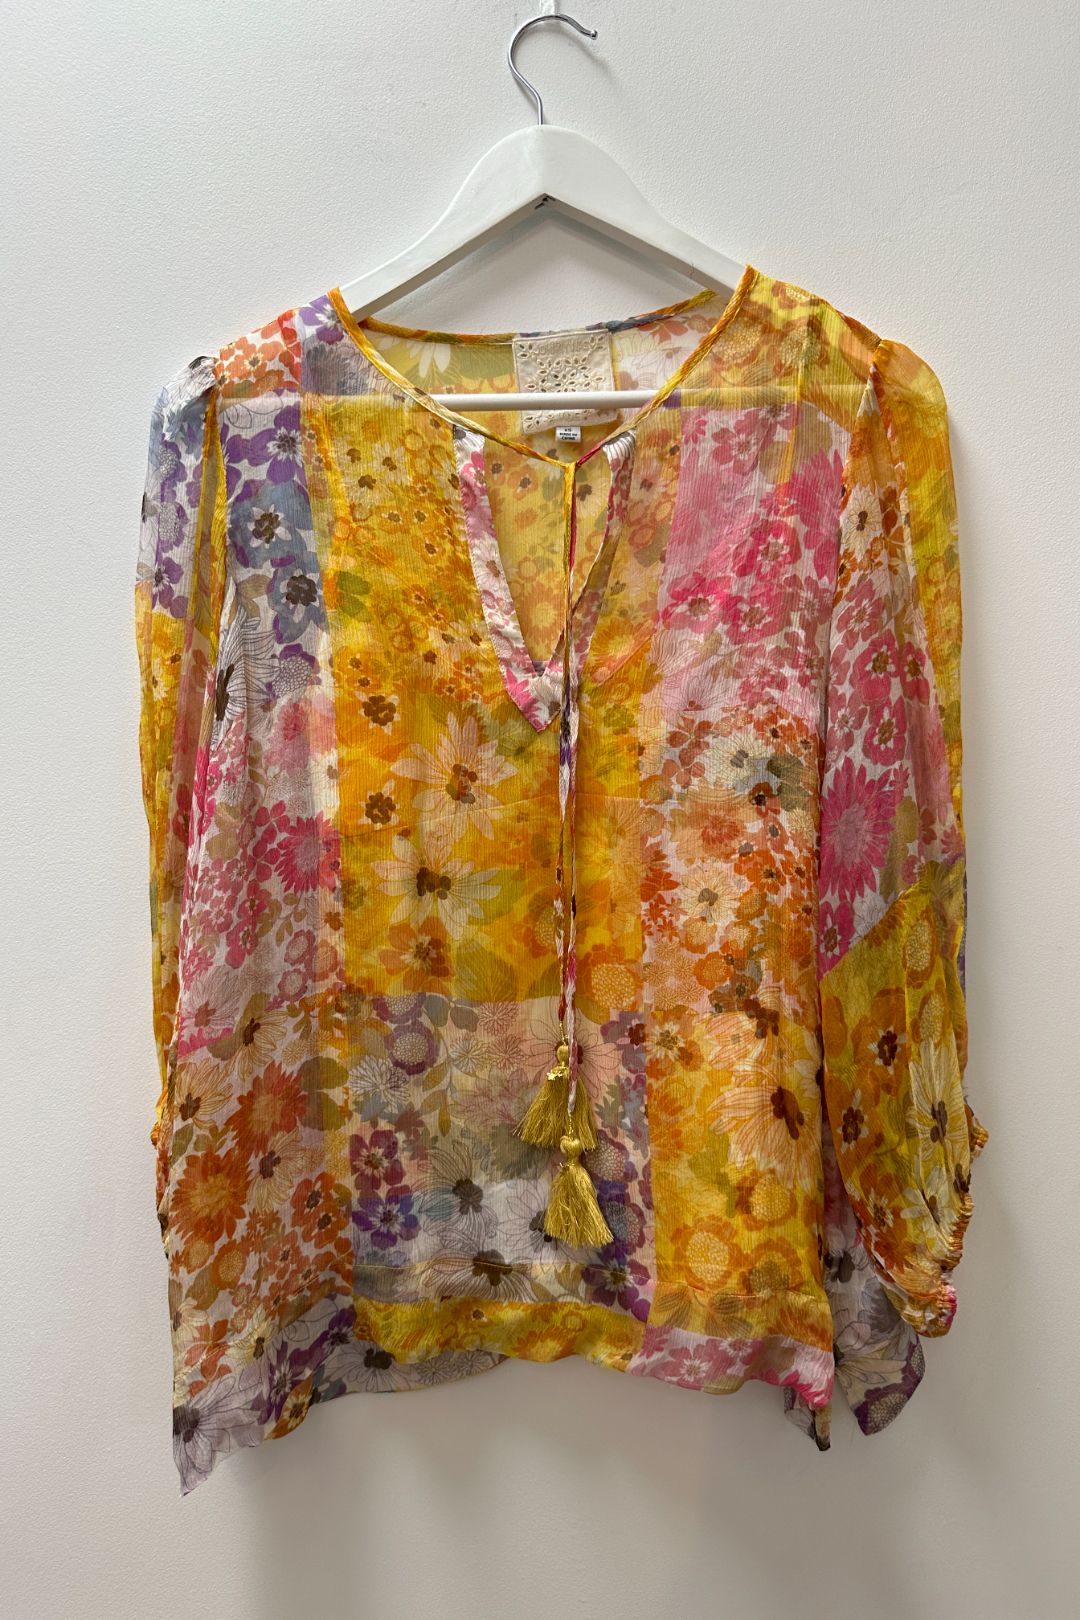 Johnny Was Becky Floral Chiffon Peasant Top